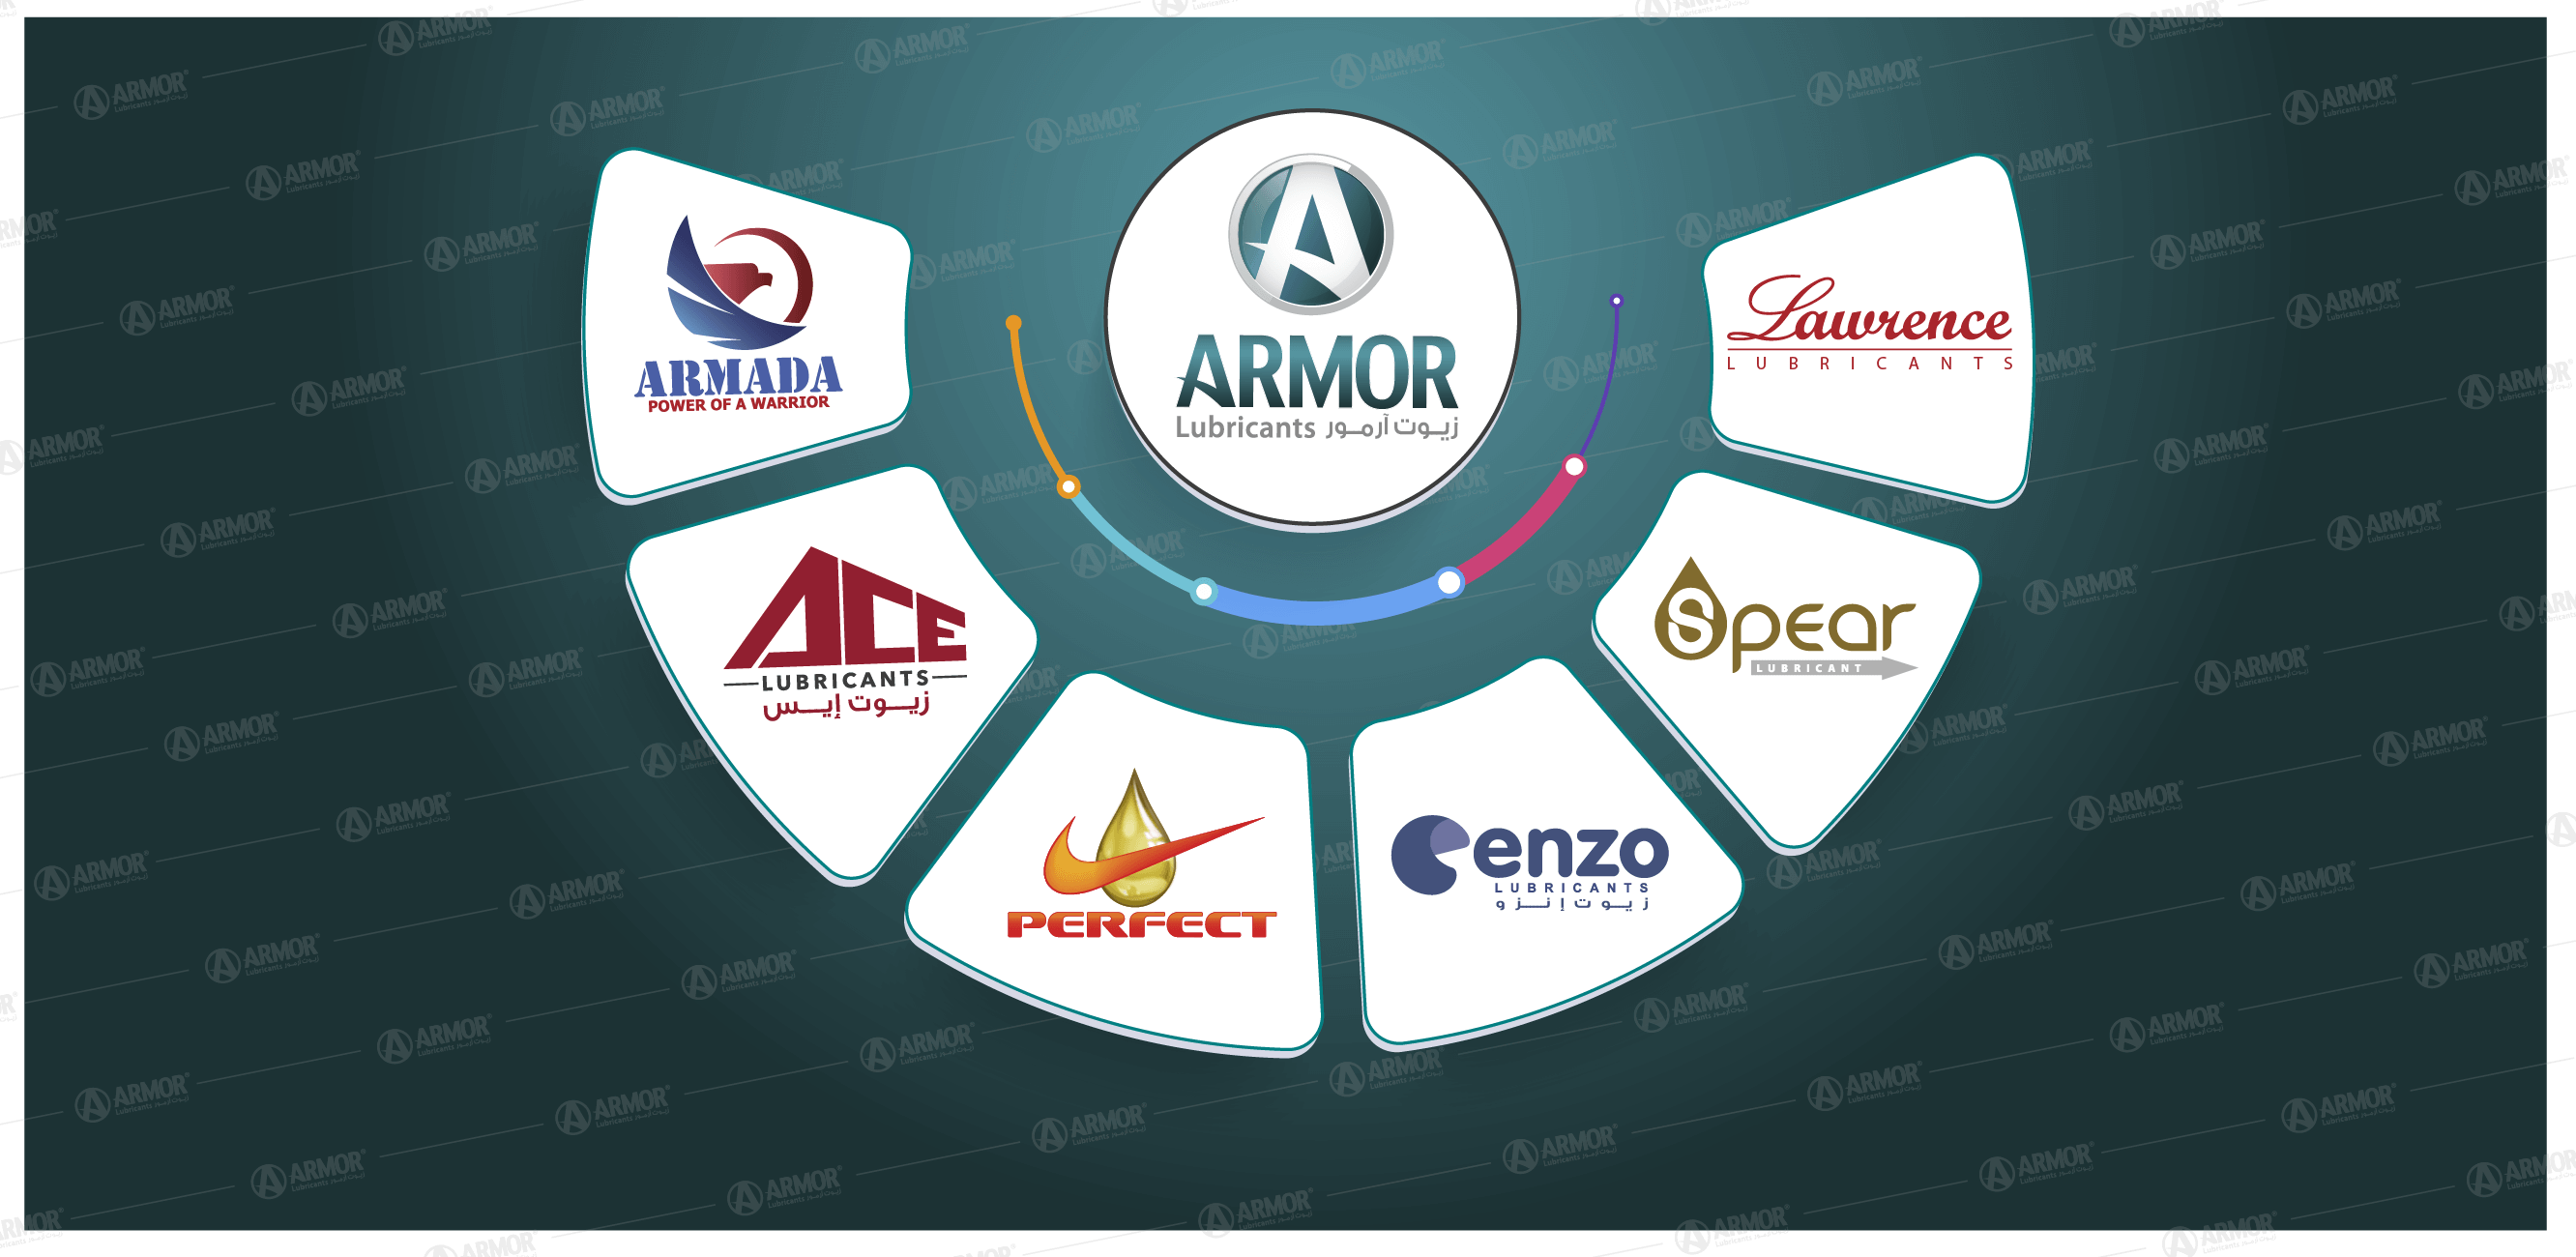 Armor Lubricants and its brands